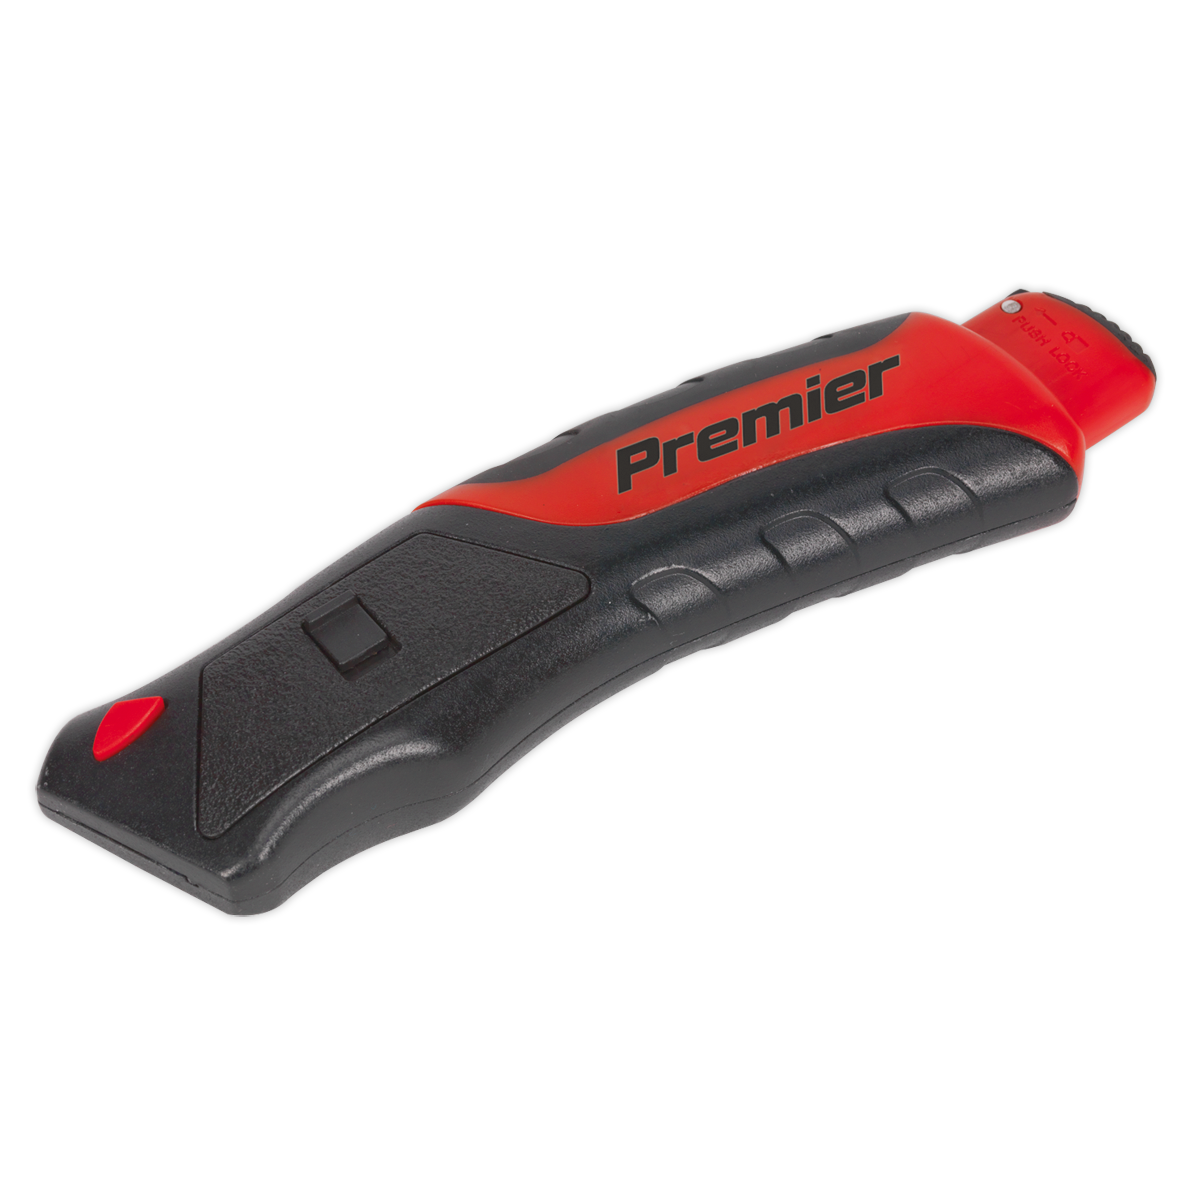 Sealey Pressure Action Auto-Load Utility Knife AK8606